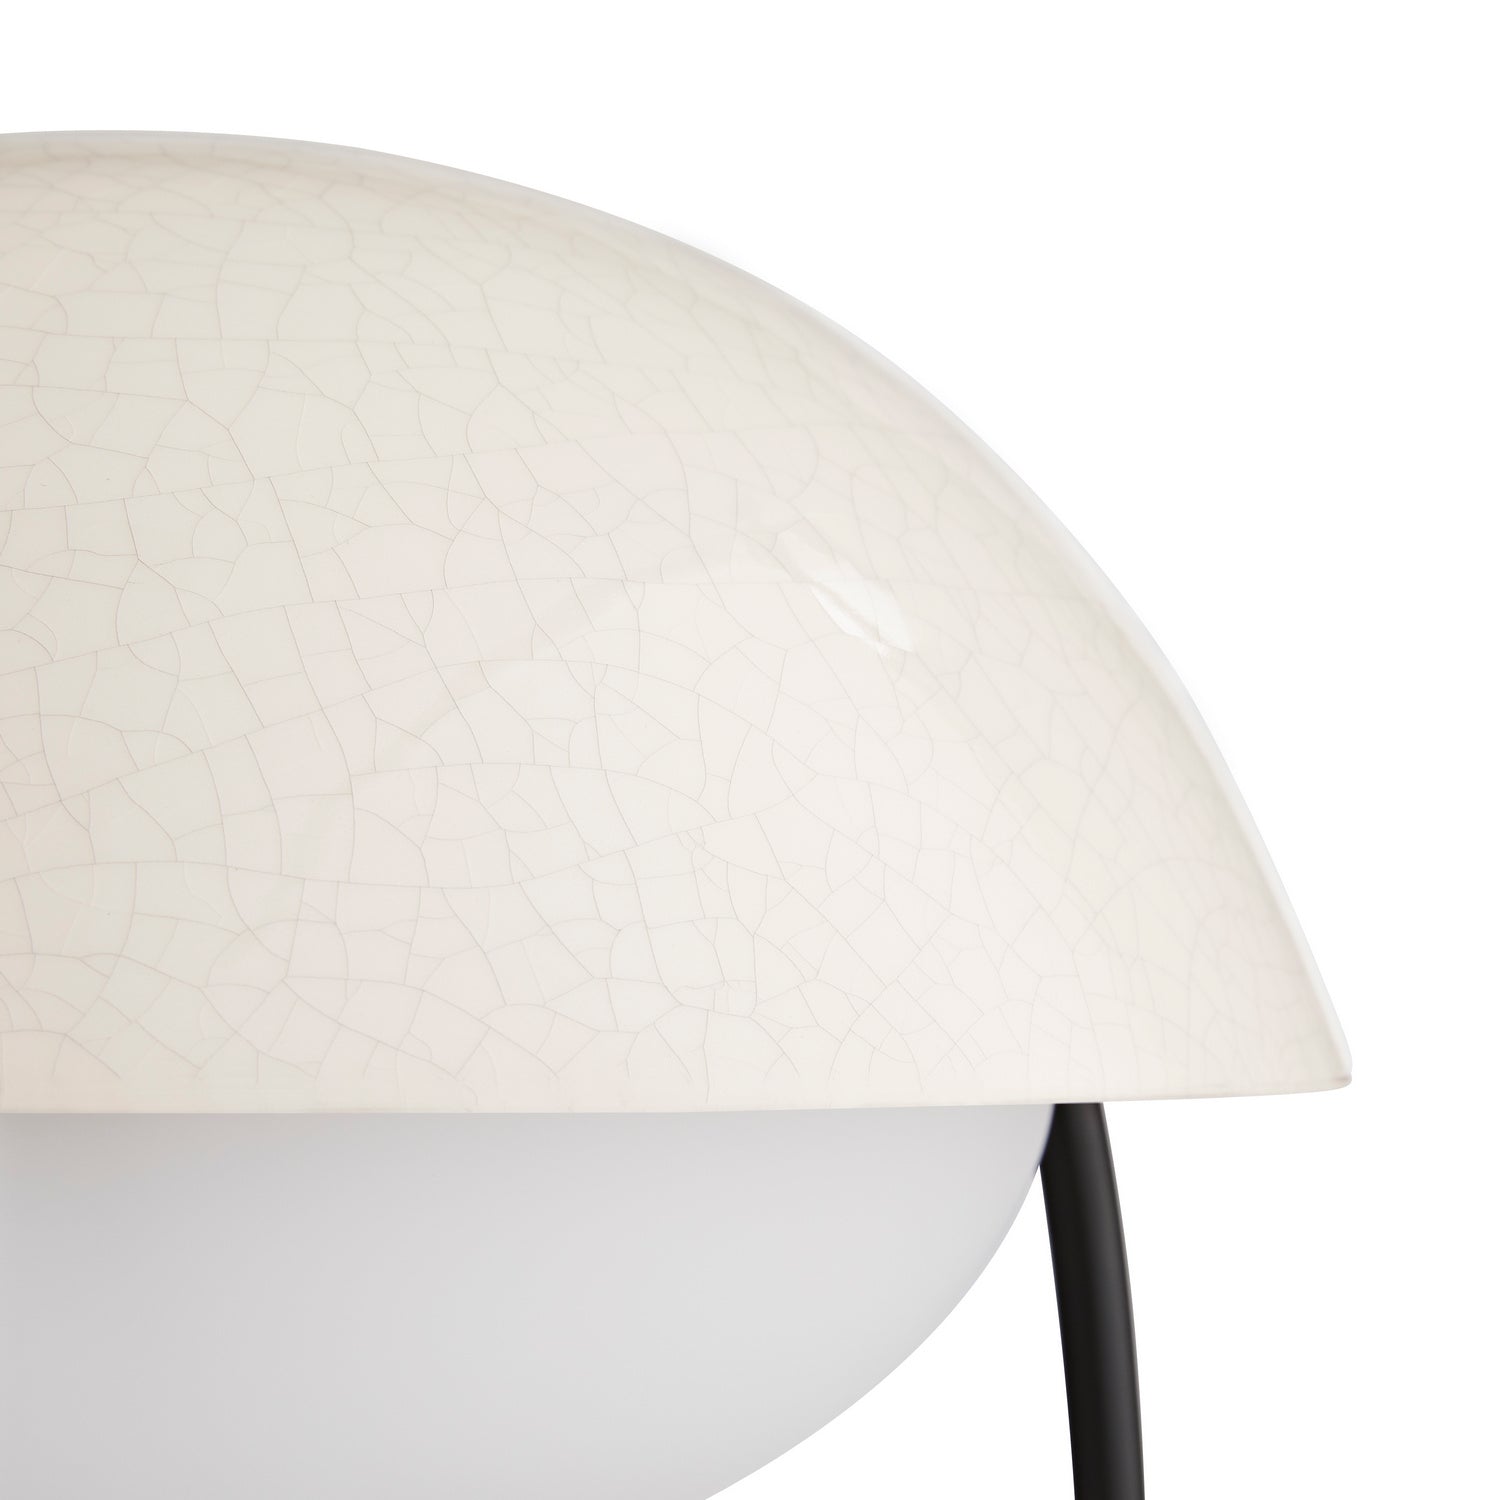 One Light Lamp from the Glaze collection in Ivory Stained Crackle finish